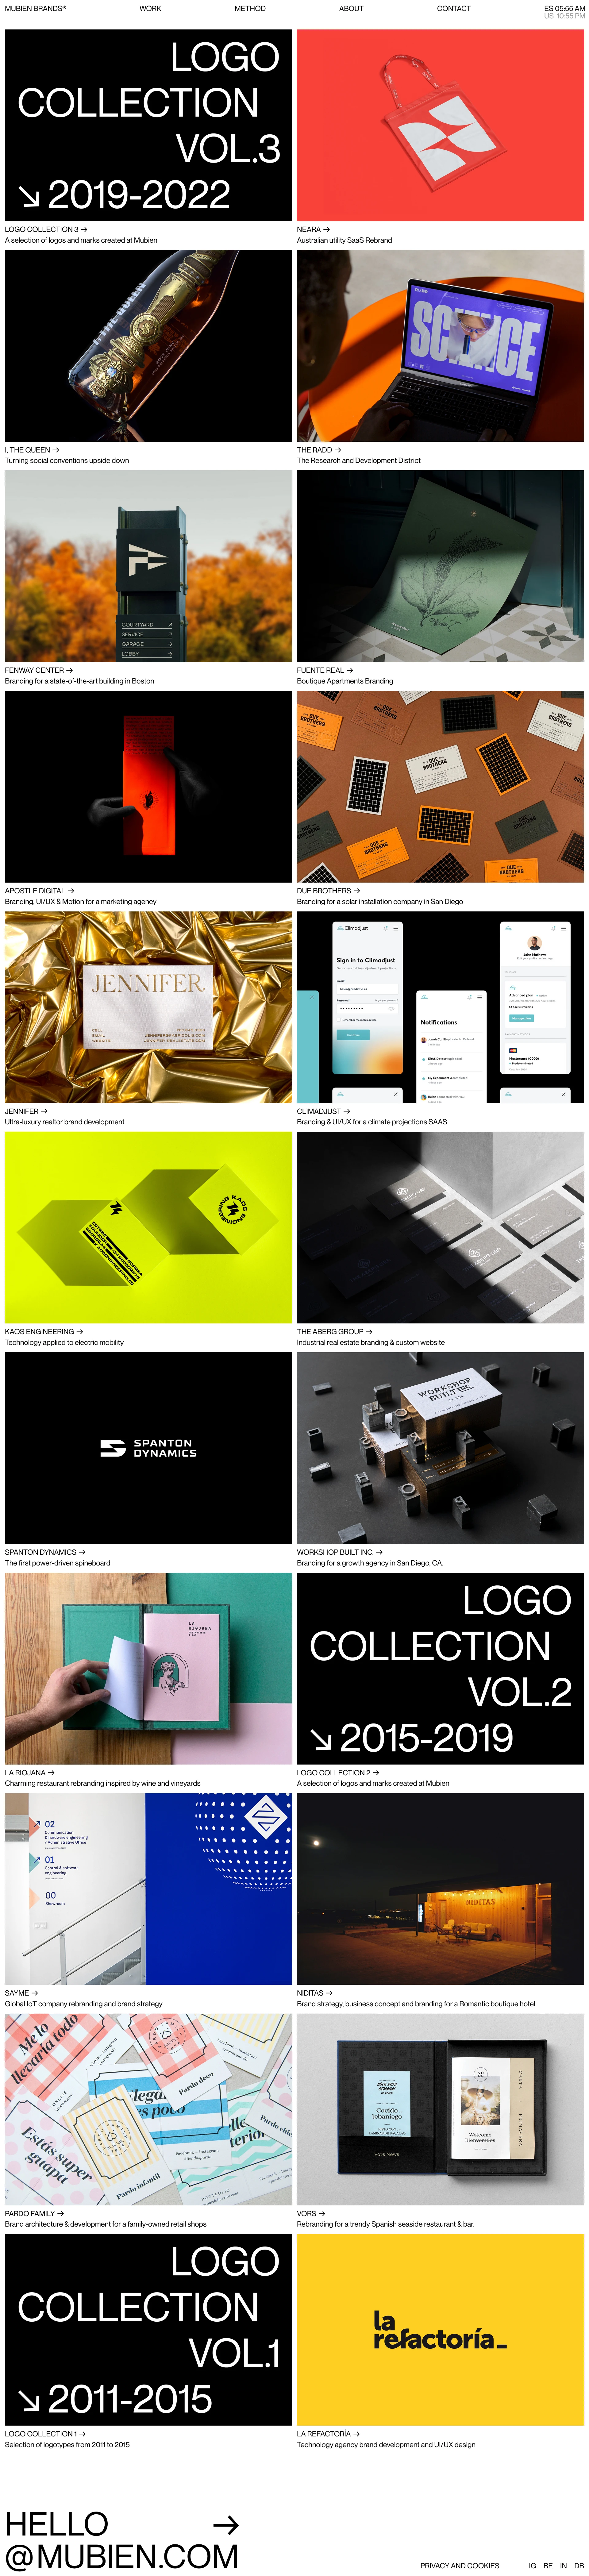 Mubien Brands Landing Page Example: Mubien Brands is an International branding and web development boutique studio specializing in visual identity design and brand strategy.